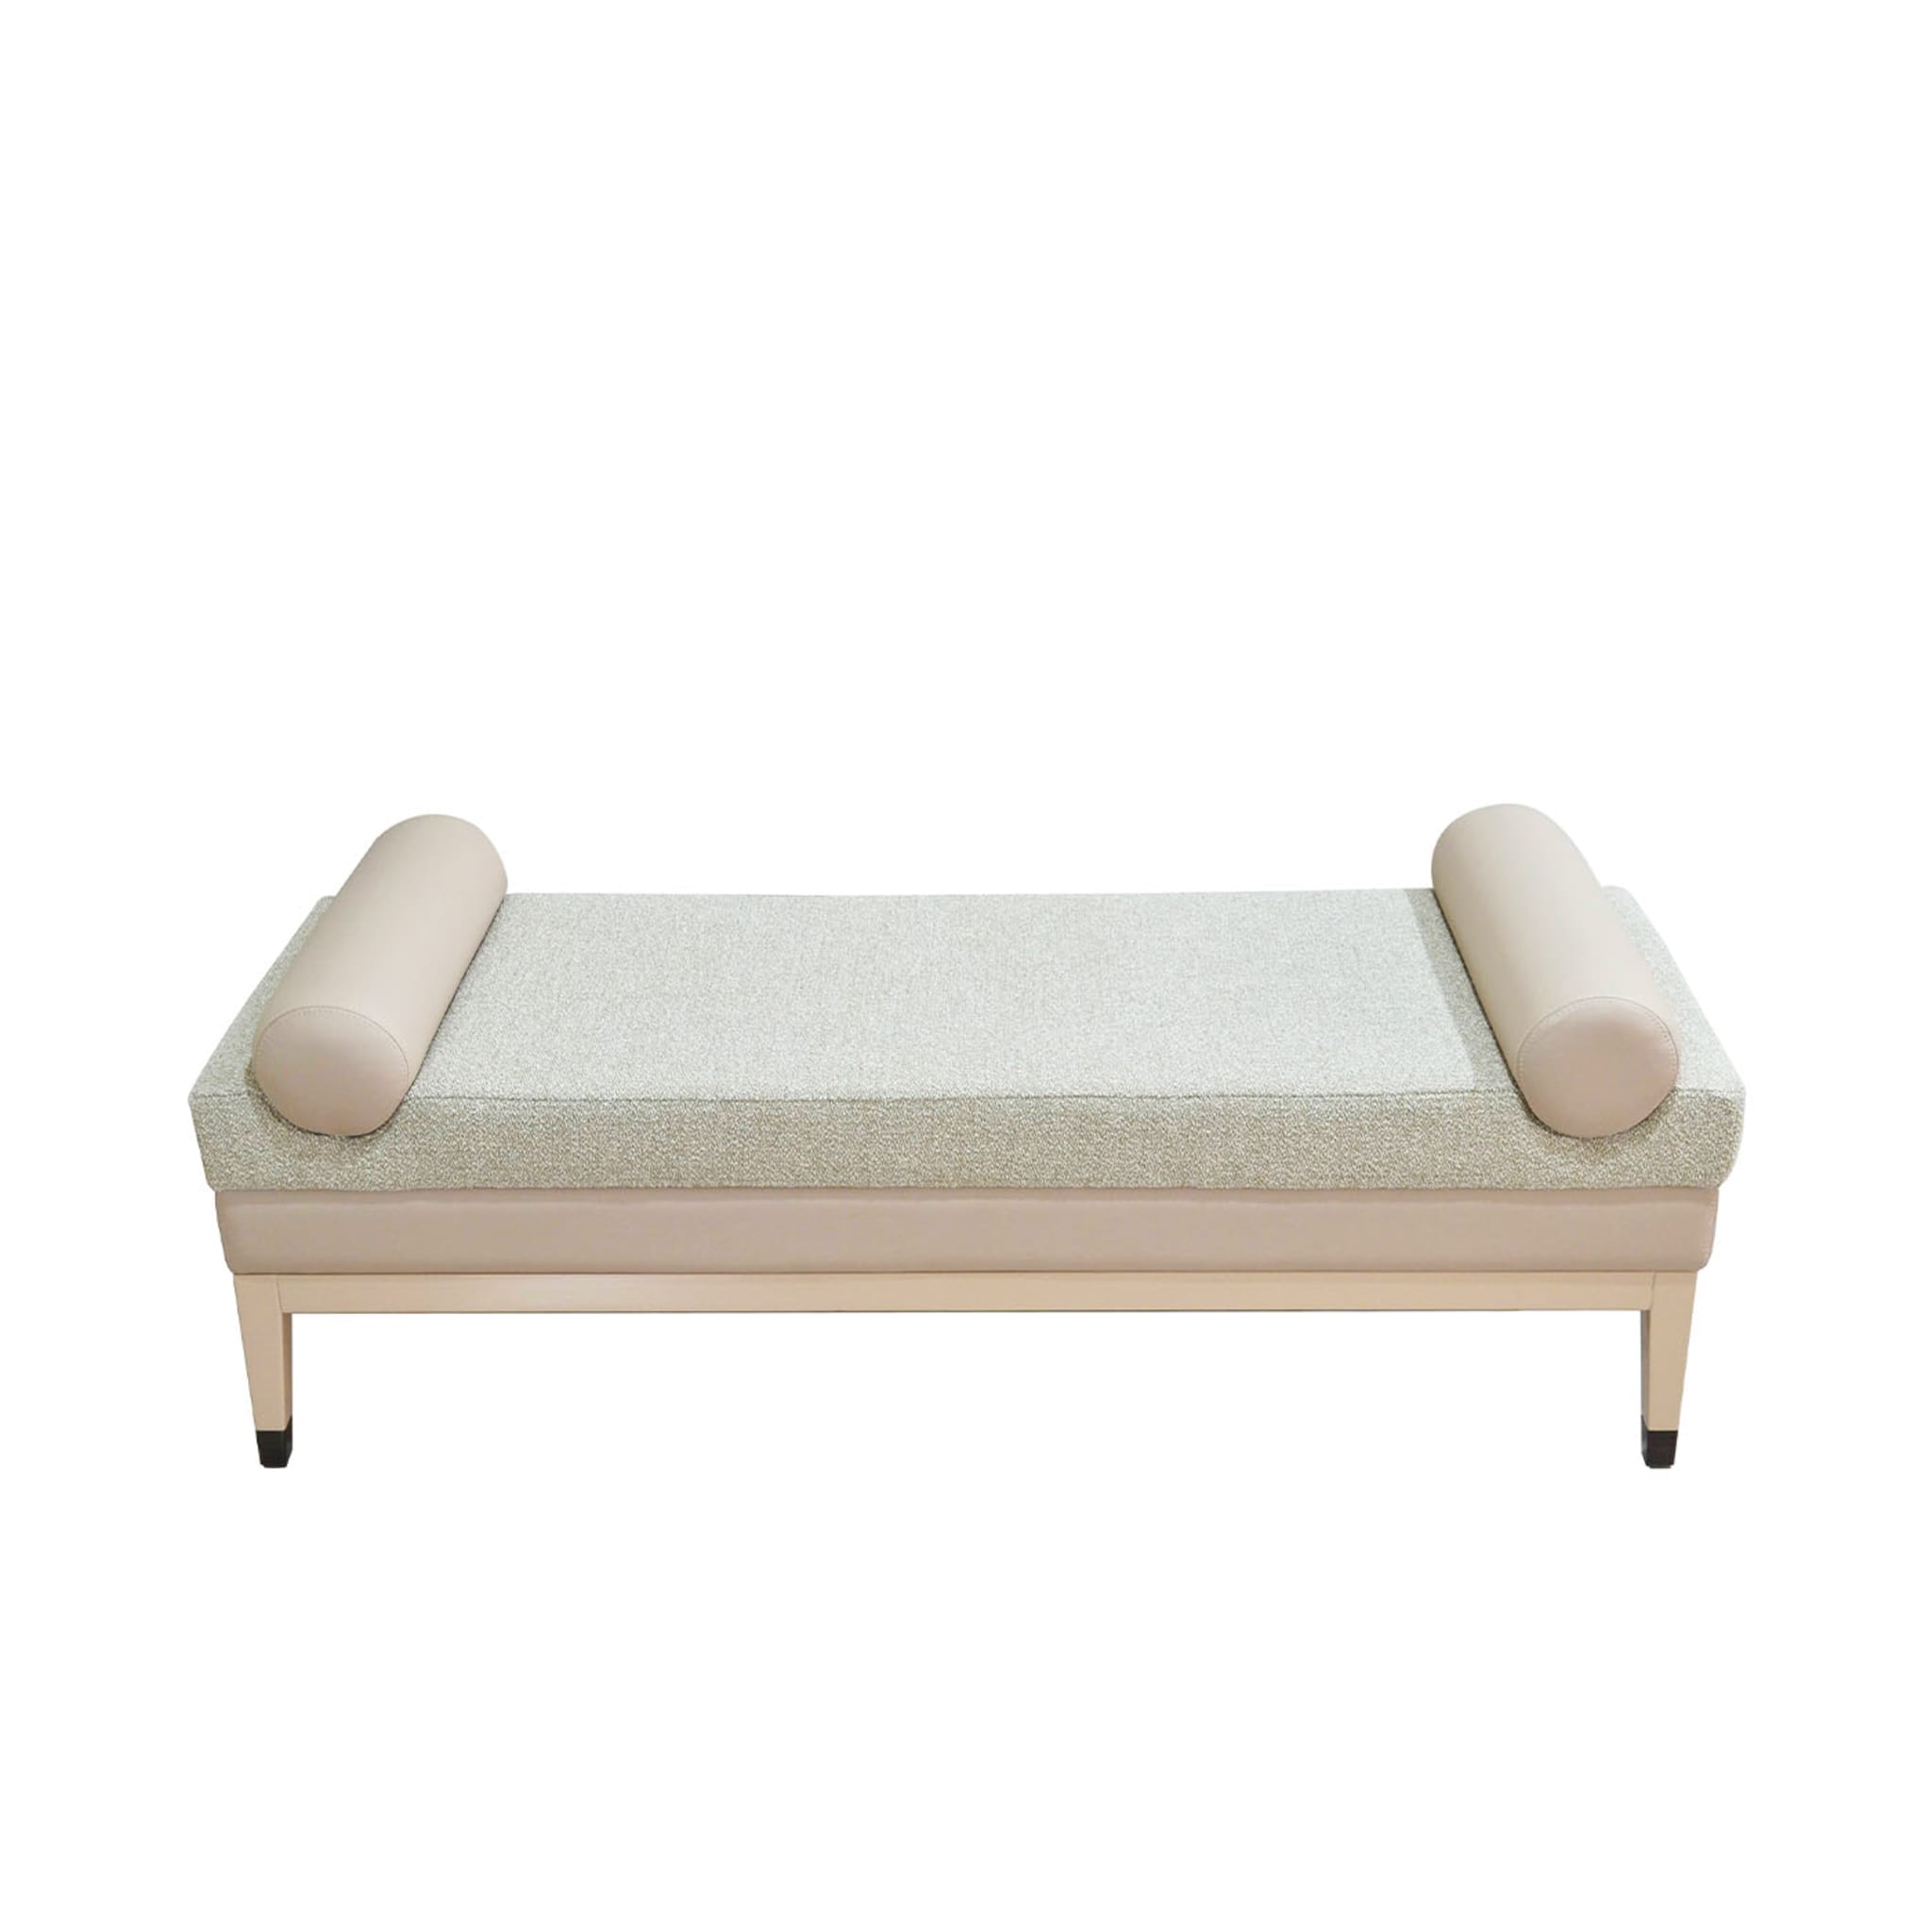 Italian Contemporary Upholstered Bench In Quinoa Fabric - Alternative view 1